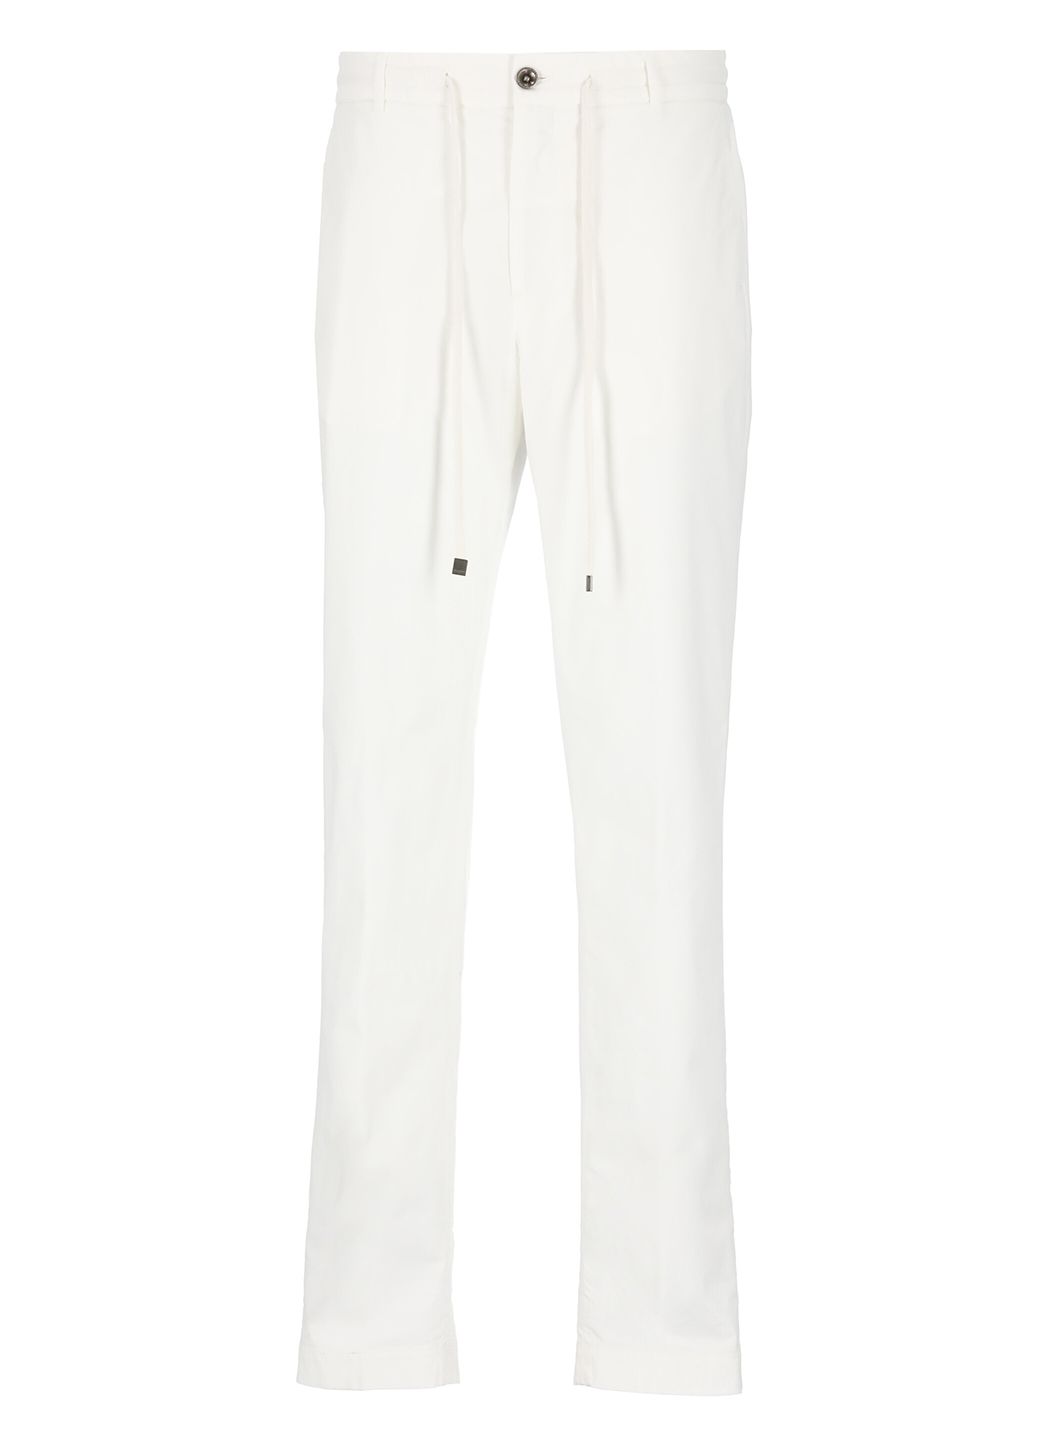 Cotton curdoroy trousers